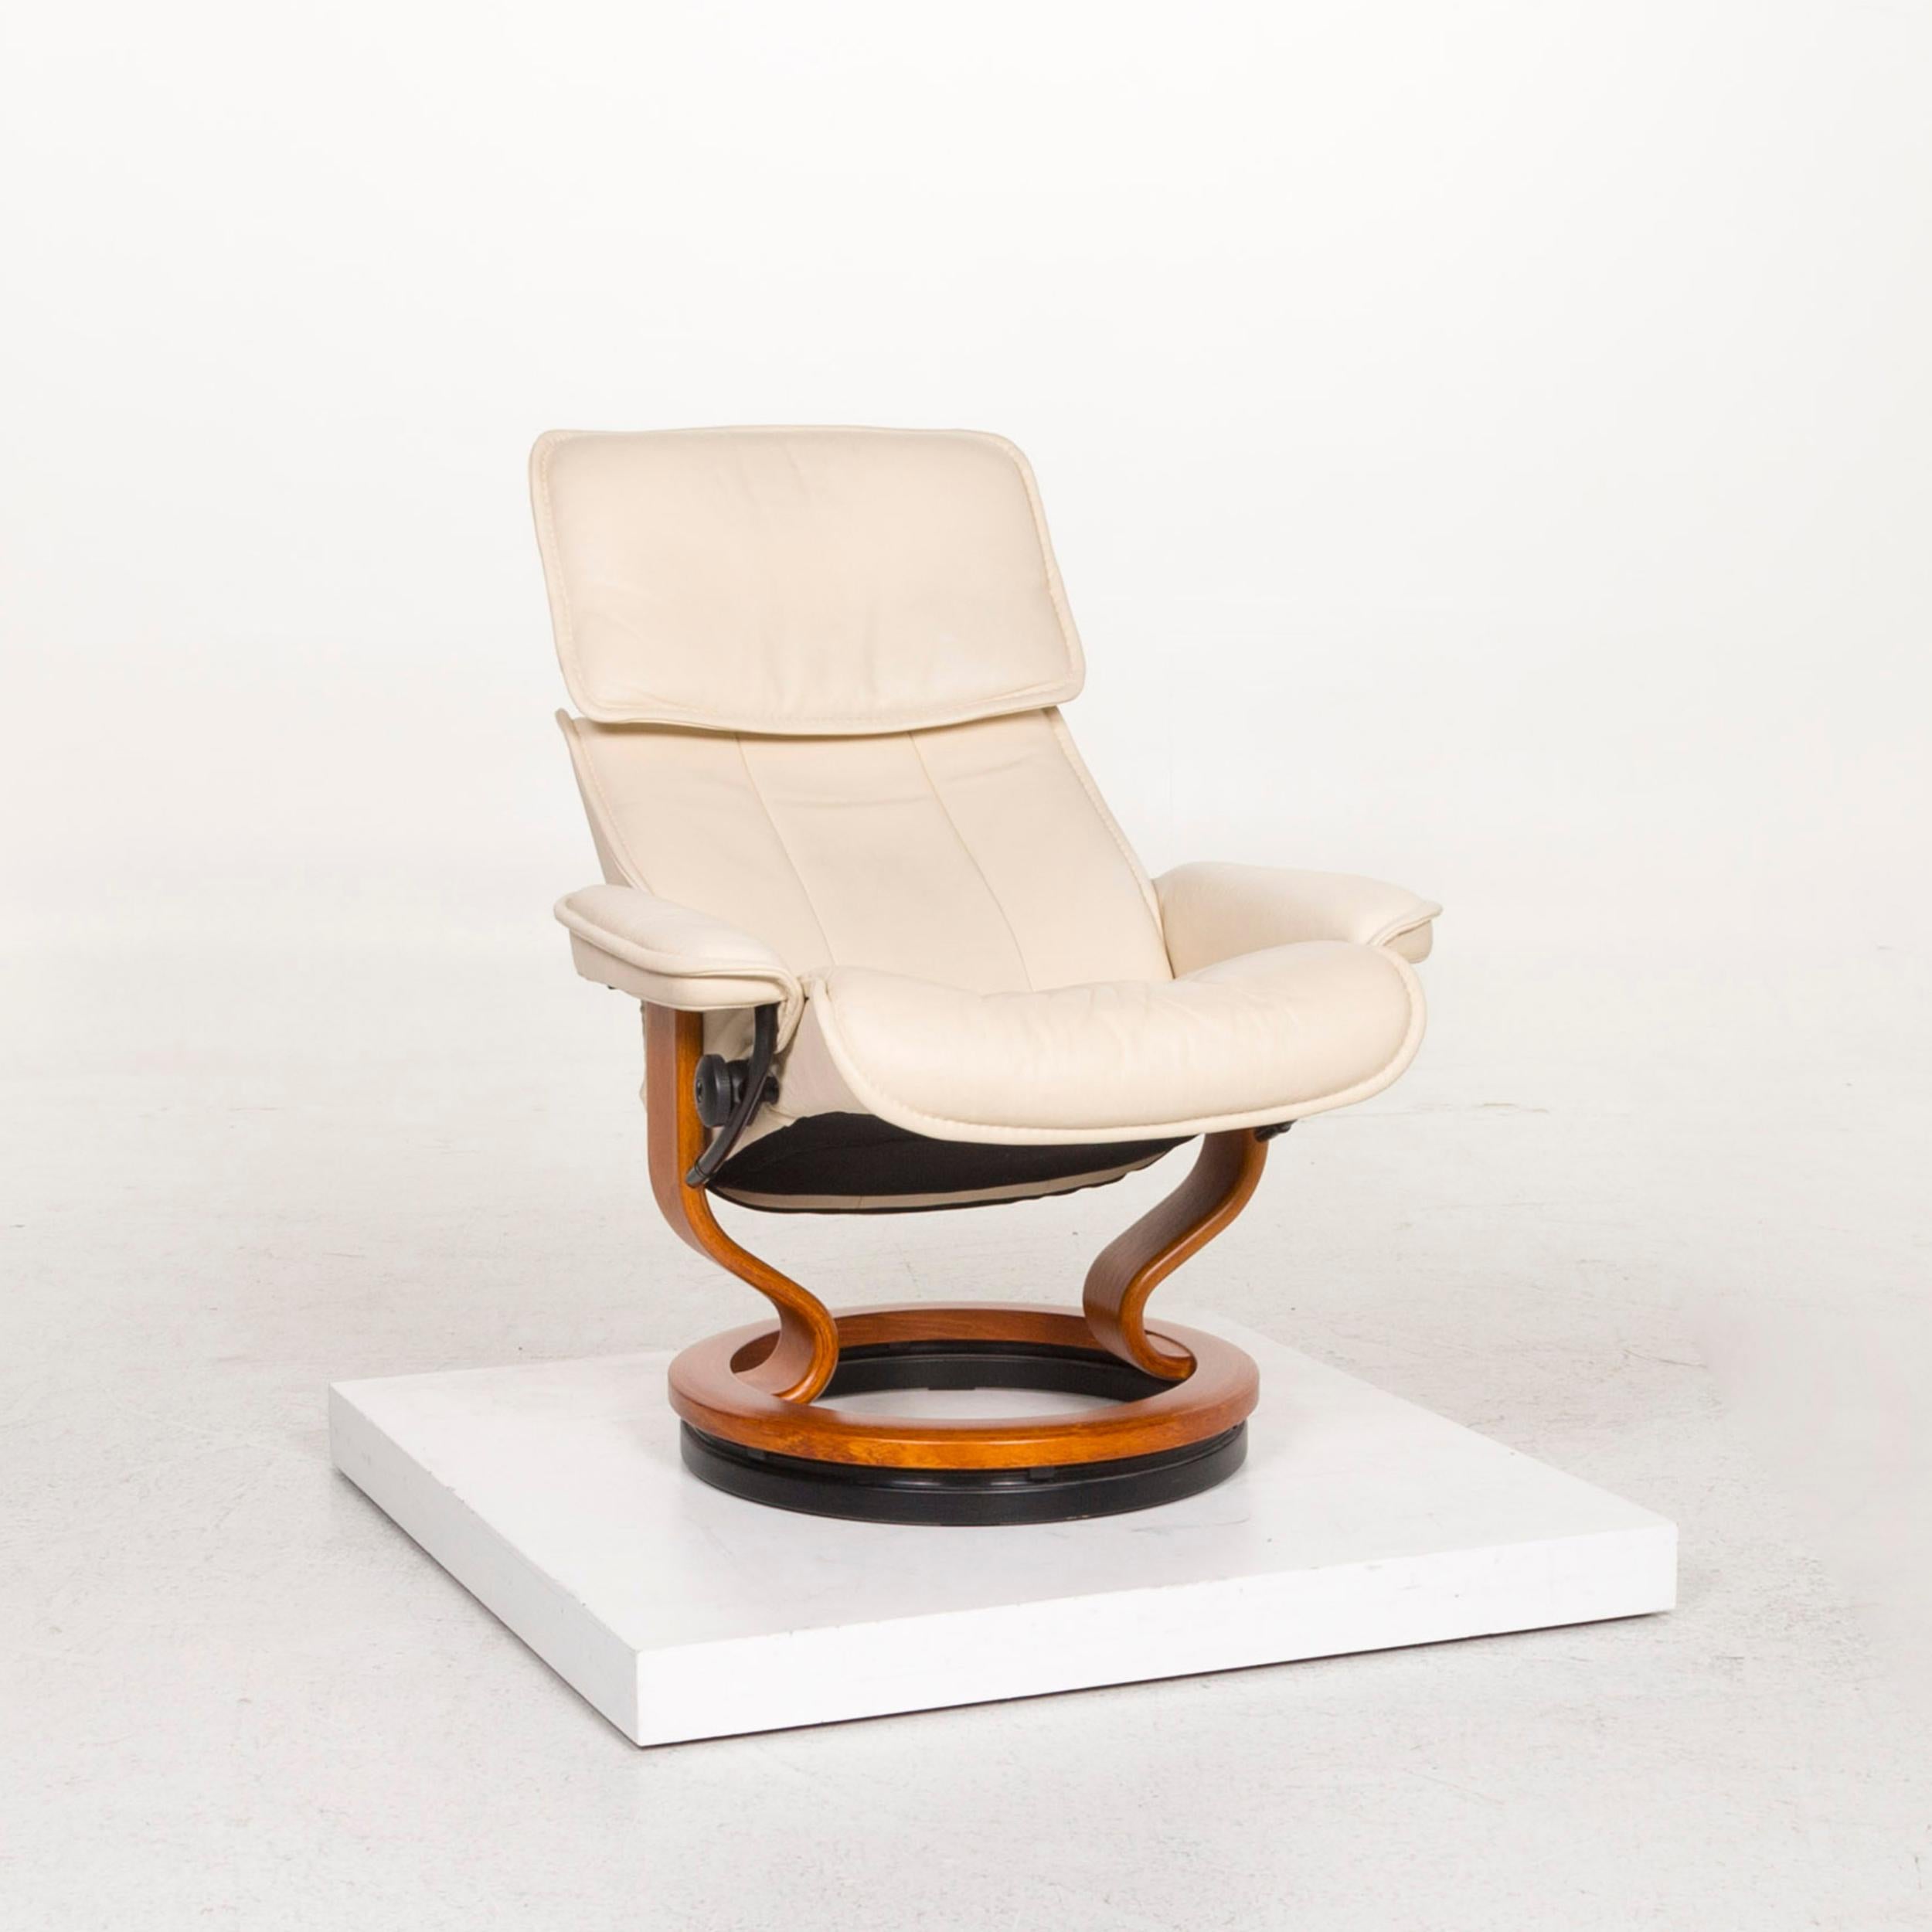 We bring to you a Stressless leather armchair cream relax function function.
 SKU: #12717
 

 Product Measurements in centimeters:
 

 depth: 73
 width: 79
 height: 99
 seat-height: 45
 rest-height: 56
 seat-depth: 47
 seat-width: 55
